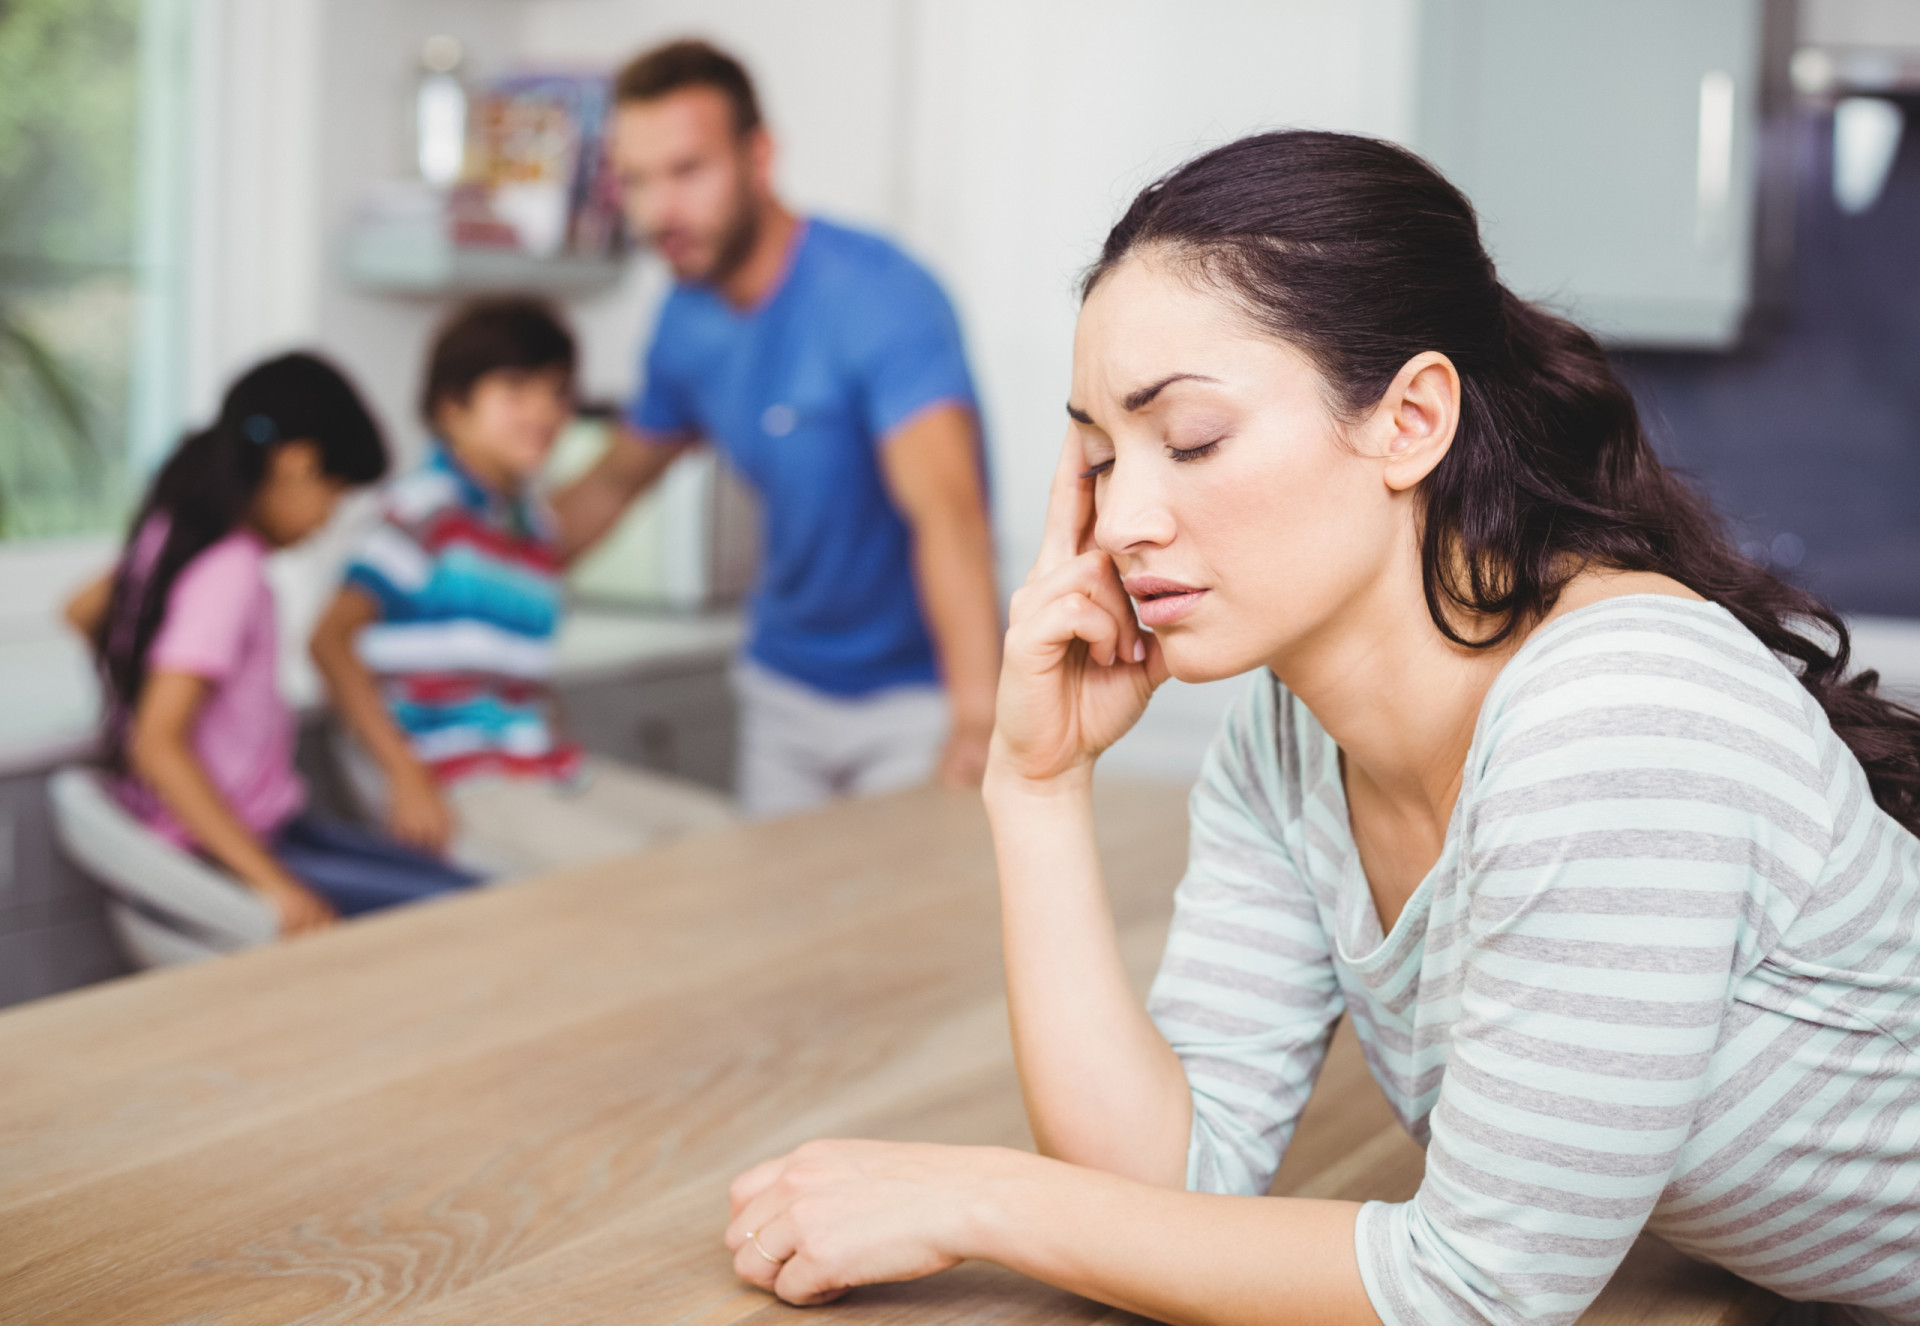 <p>Mom guilt refers to specific feelings of guilt experienced by almost all new mothers in relation to their role as a mother and their ability to meet their children's needs. This often overwhelming sense of failure and self-doubt can have worrying consequences for <a href="https://www.starsinsider.com/lifestyle/539766/30-things-parents-secretly-do-but-will-never-admit-to" rel="noopener">parents</a> and offspring alike, and makes the already demanding job of being a mom that much harder. But what exactly is mom guilt, why does it occur, and how can it be overcome?</p> <p>Click through and find out if you're guilty.</p>